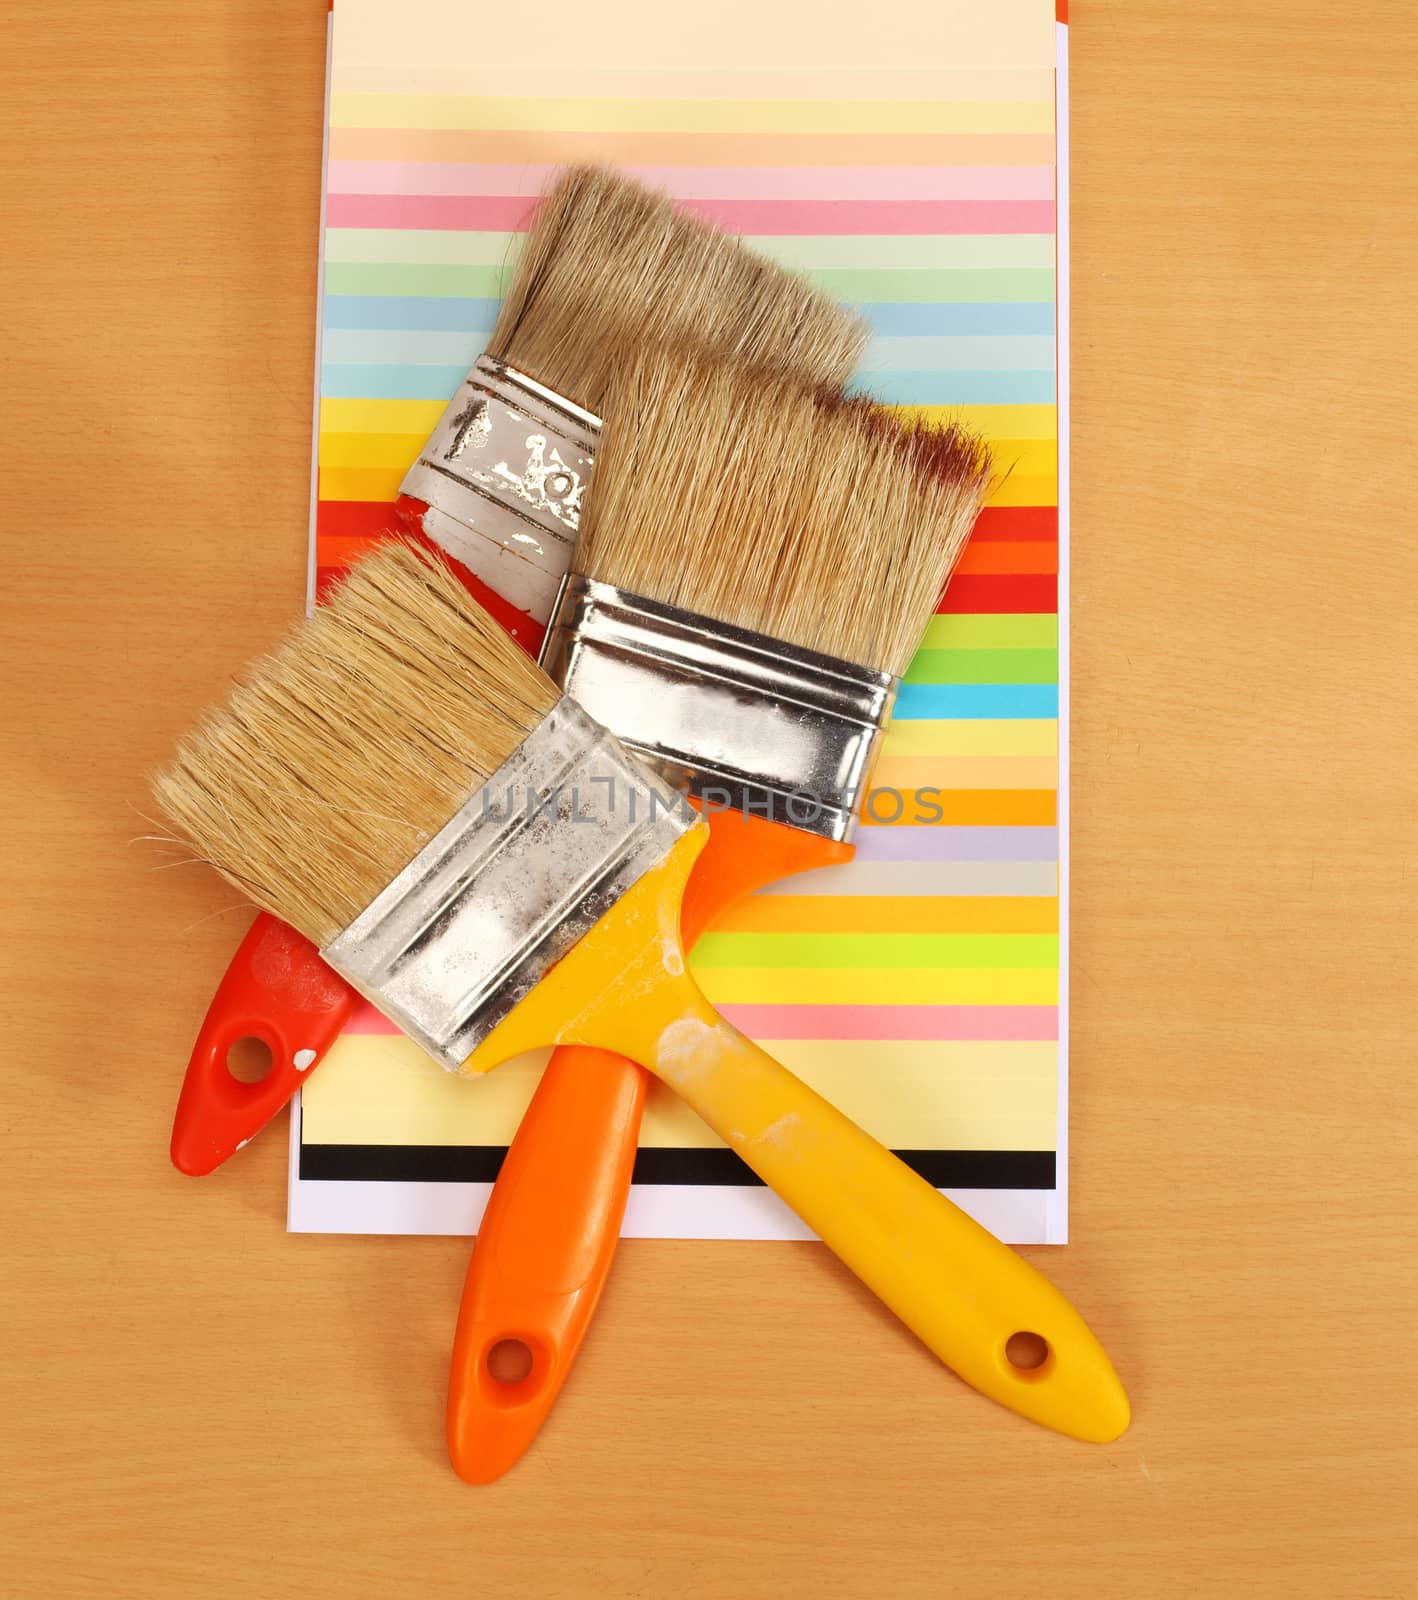  paint brushes  by alexkosev